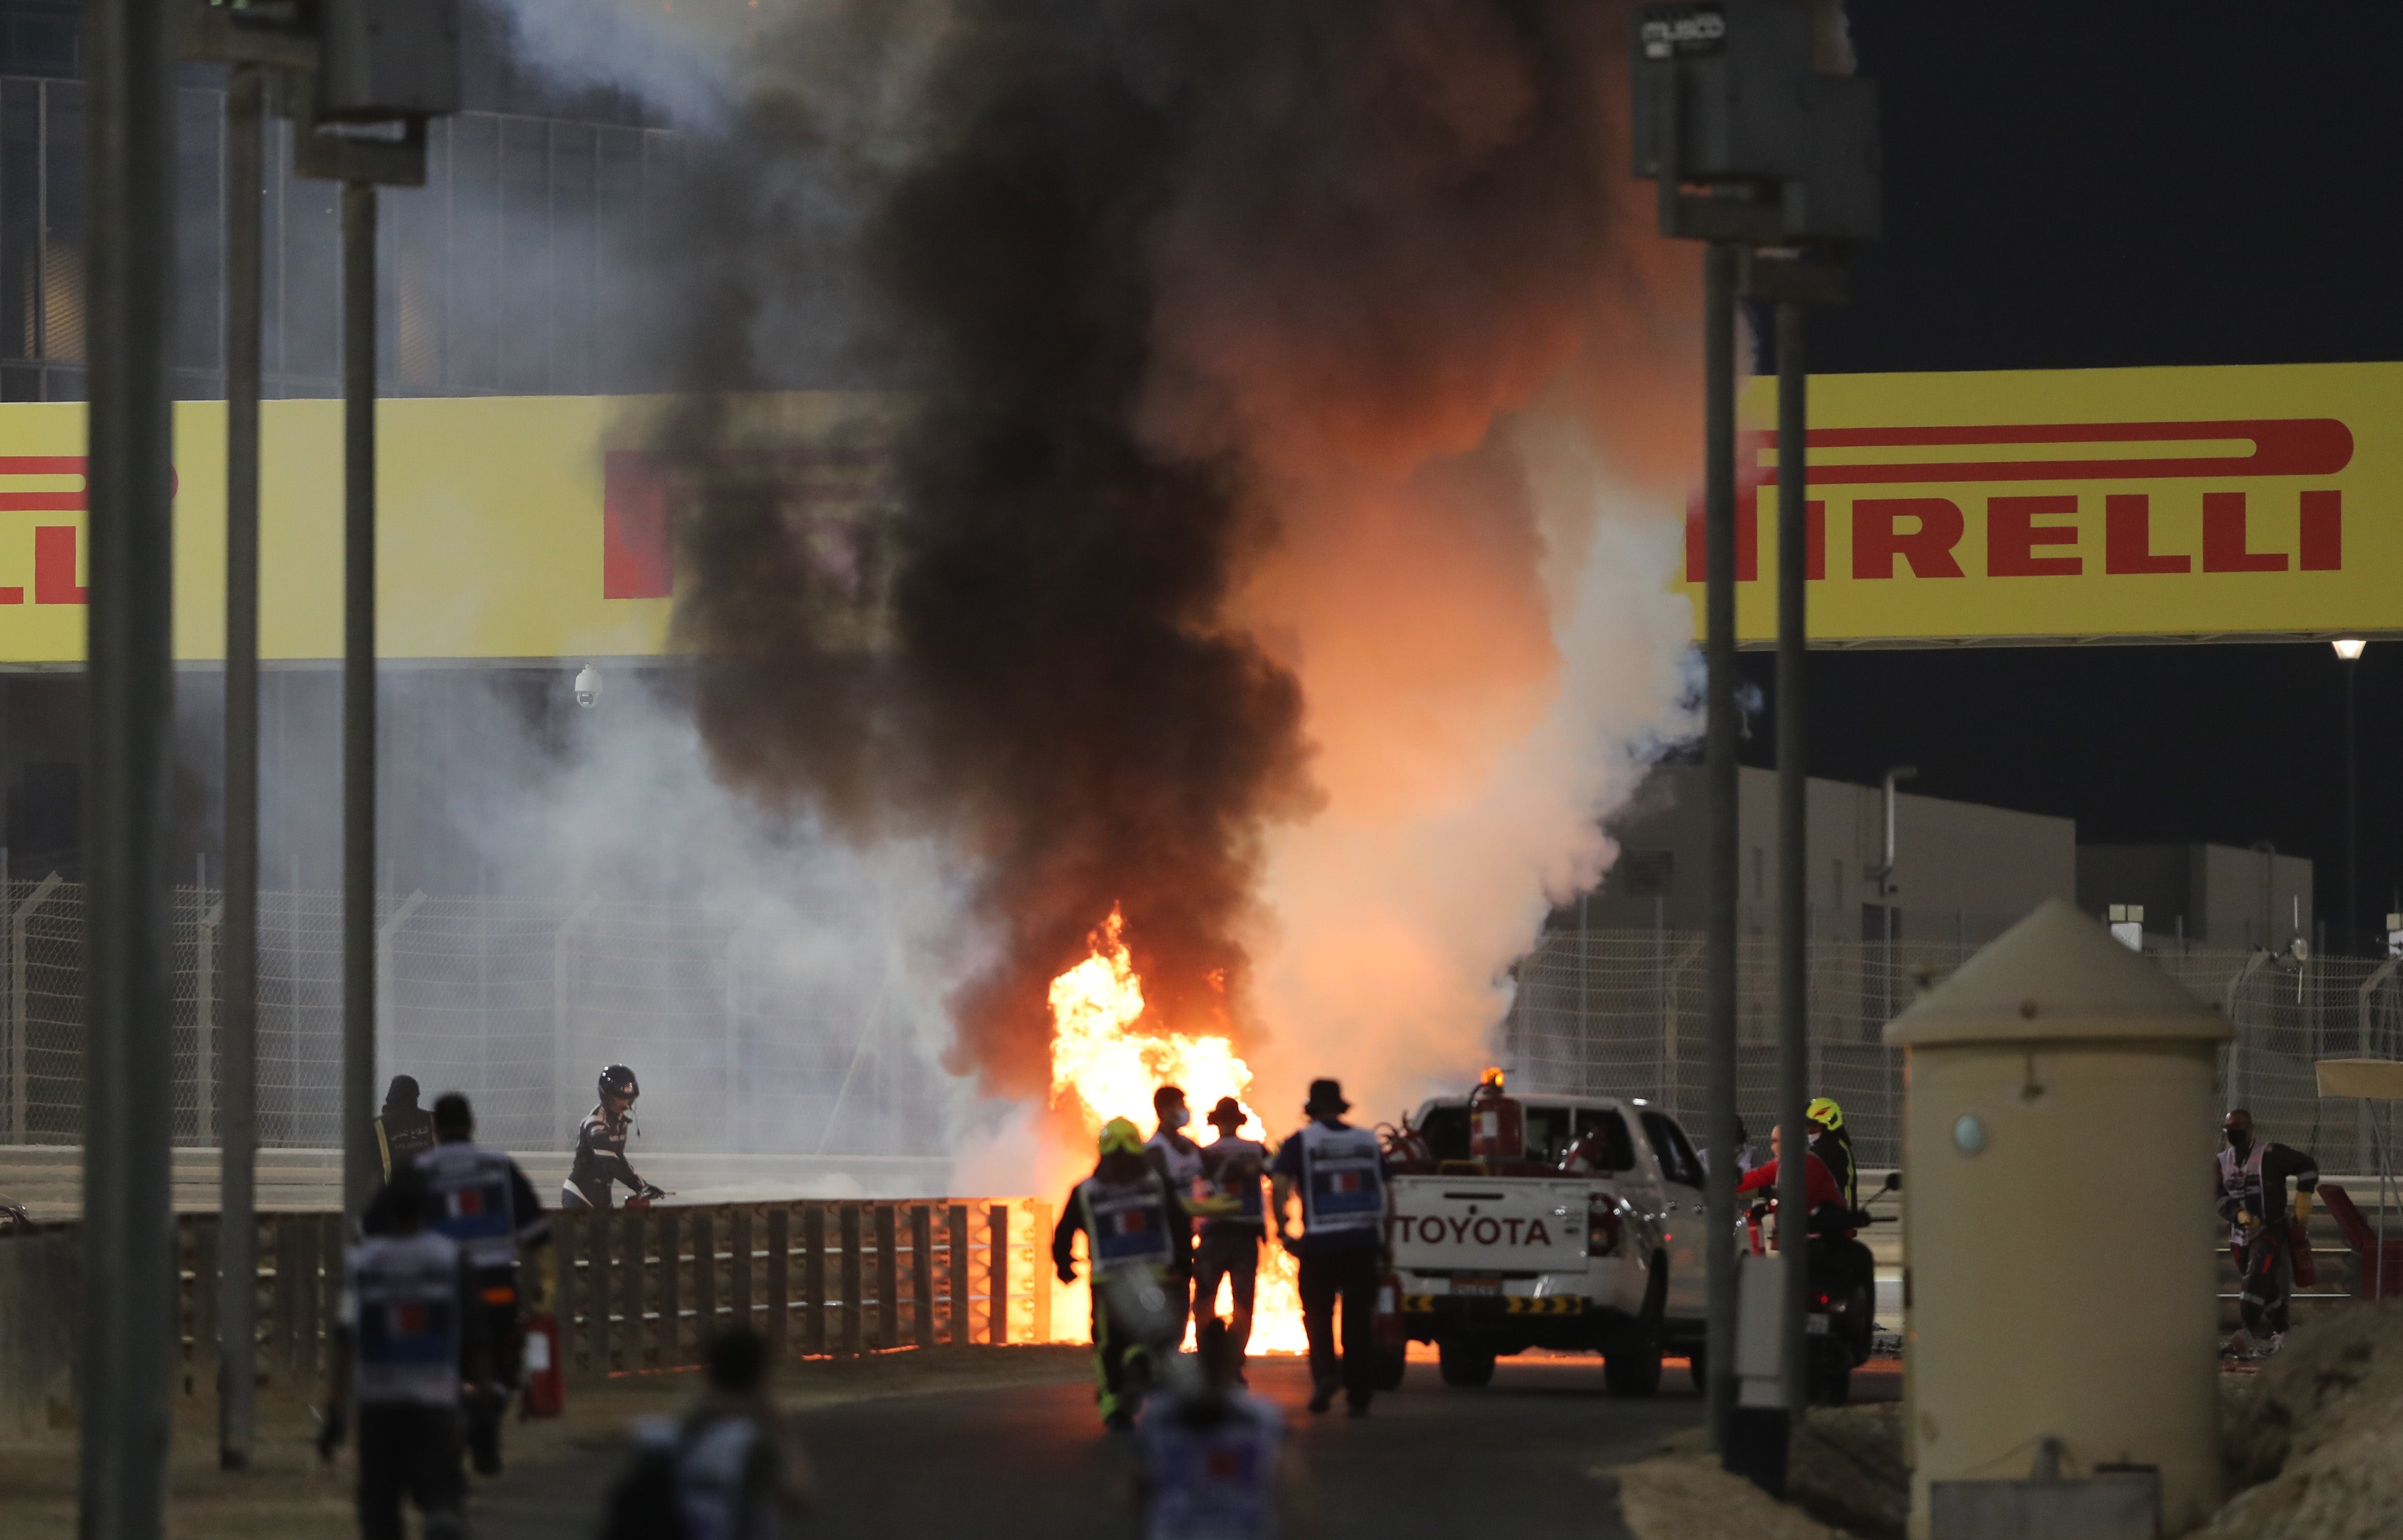 Romain Grosjean’s Haas erupted into flames after crashing on the opening lap of the Bahrain Grand Prix